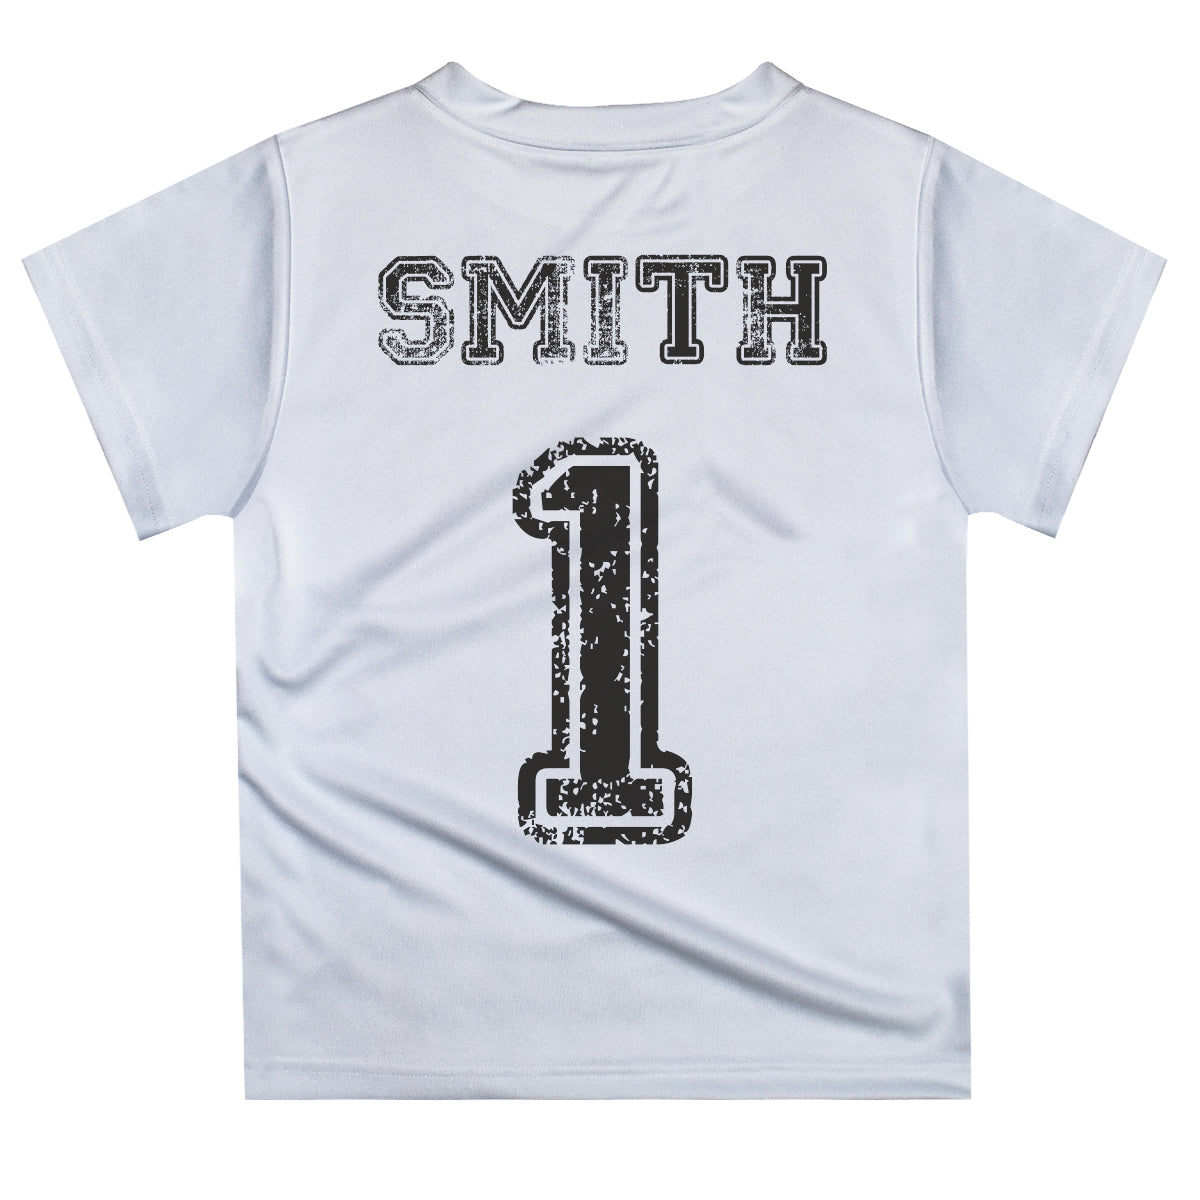 Baseball Personalized Last Name and Number White Short Sleeve Tee Shirt - Wimziy&Co.